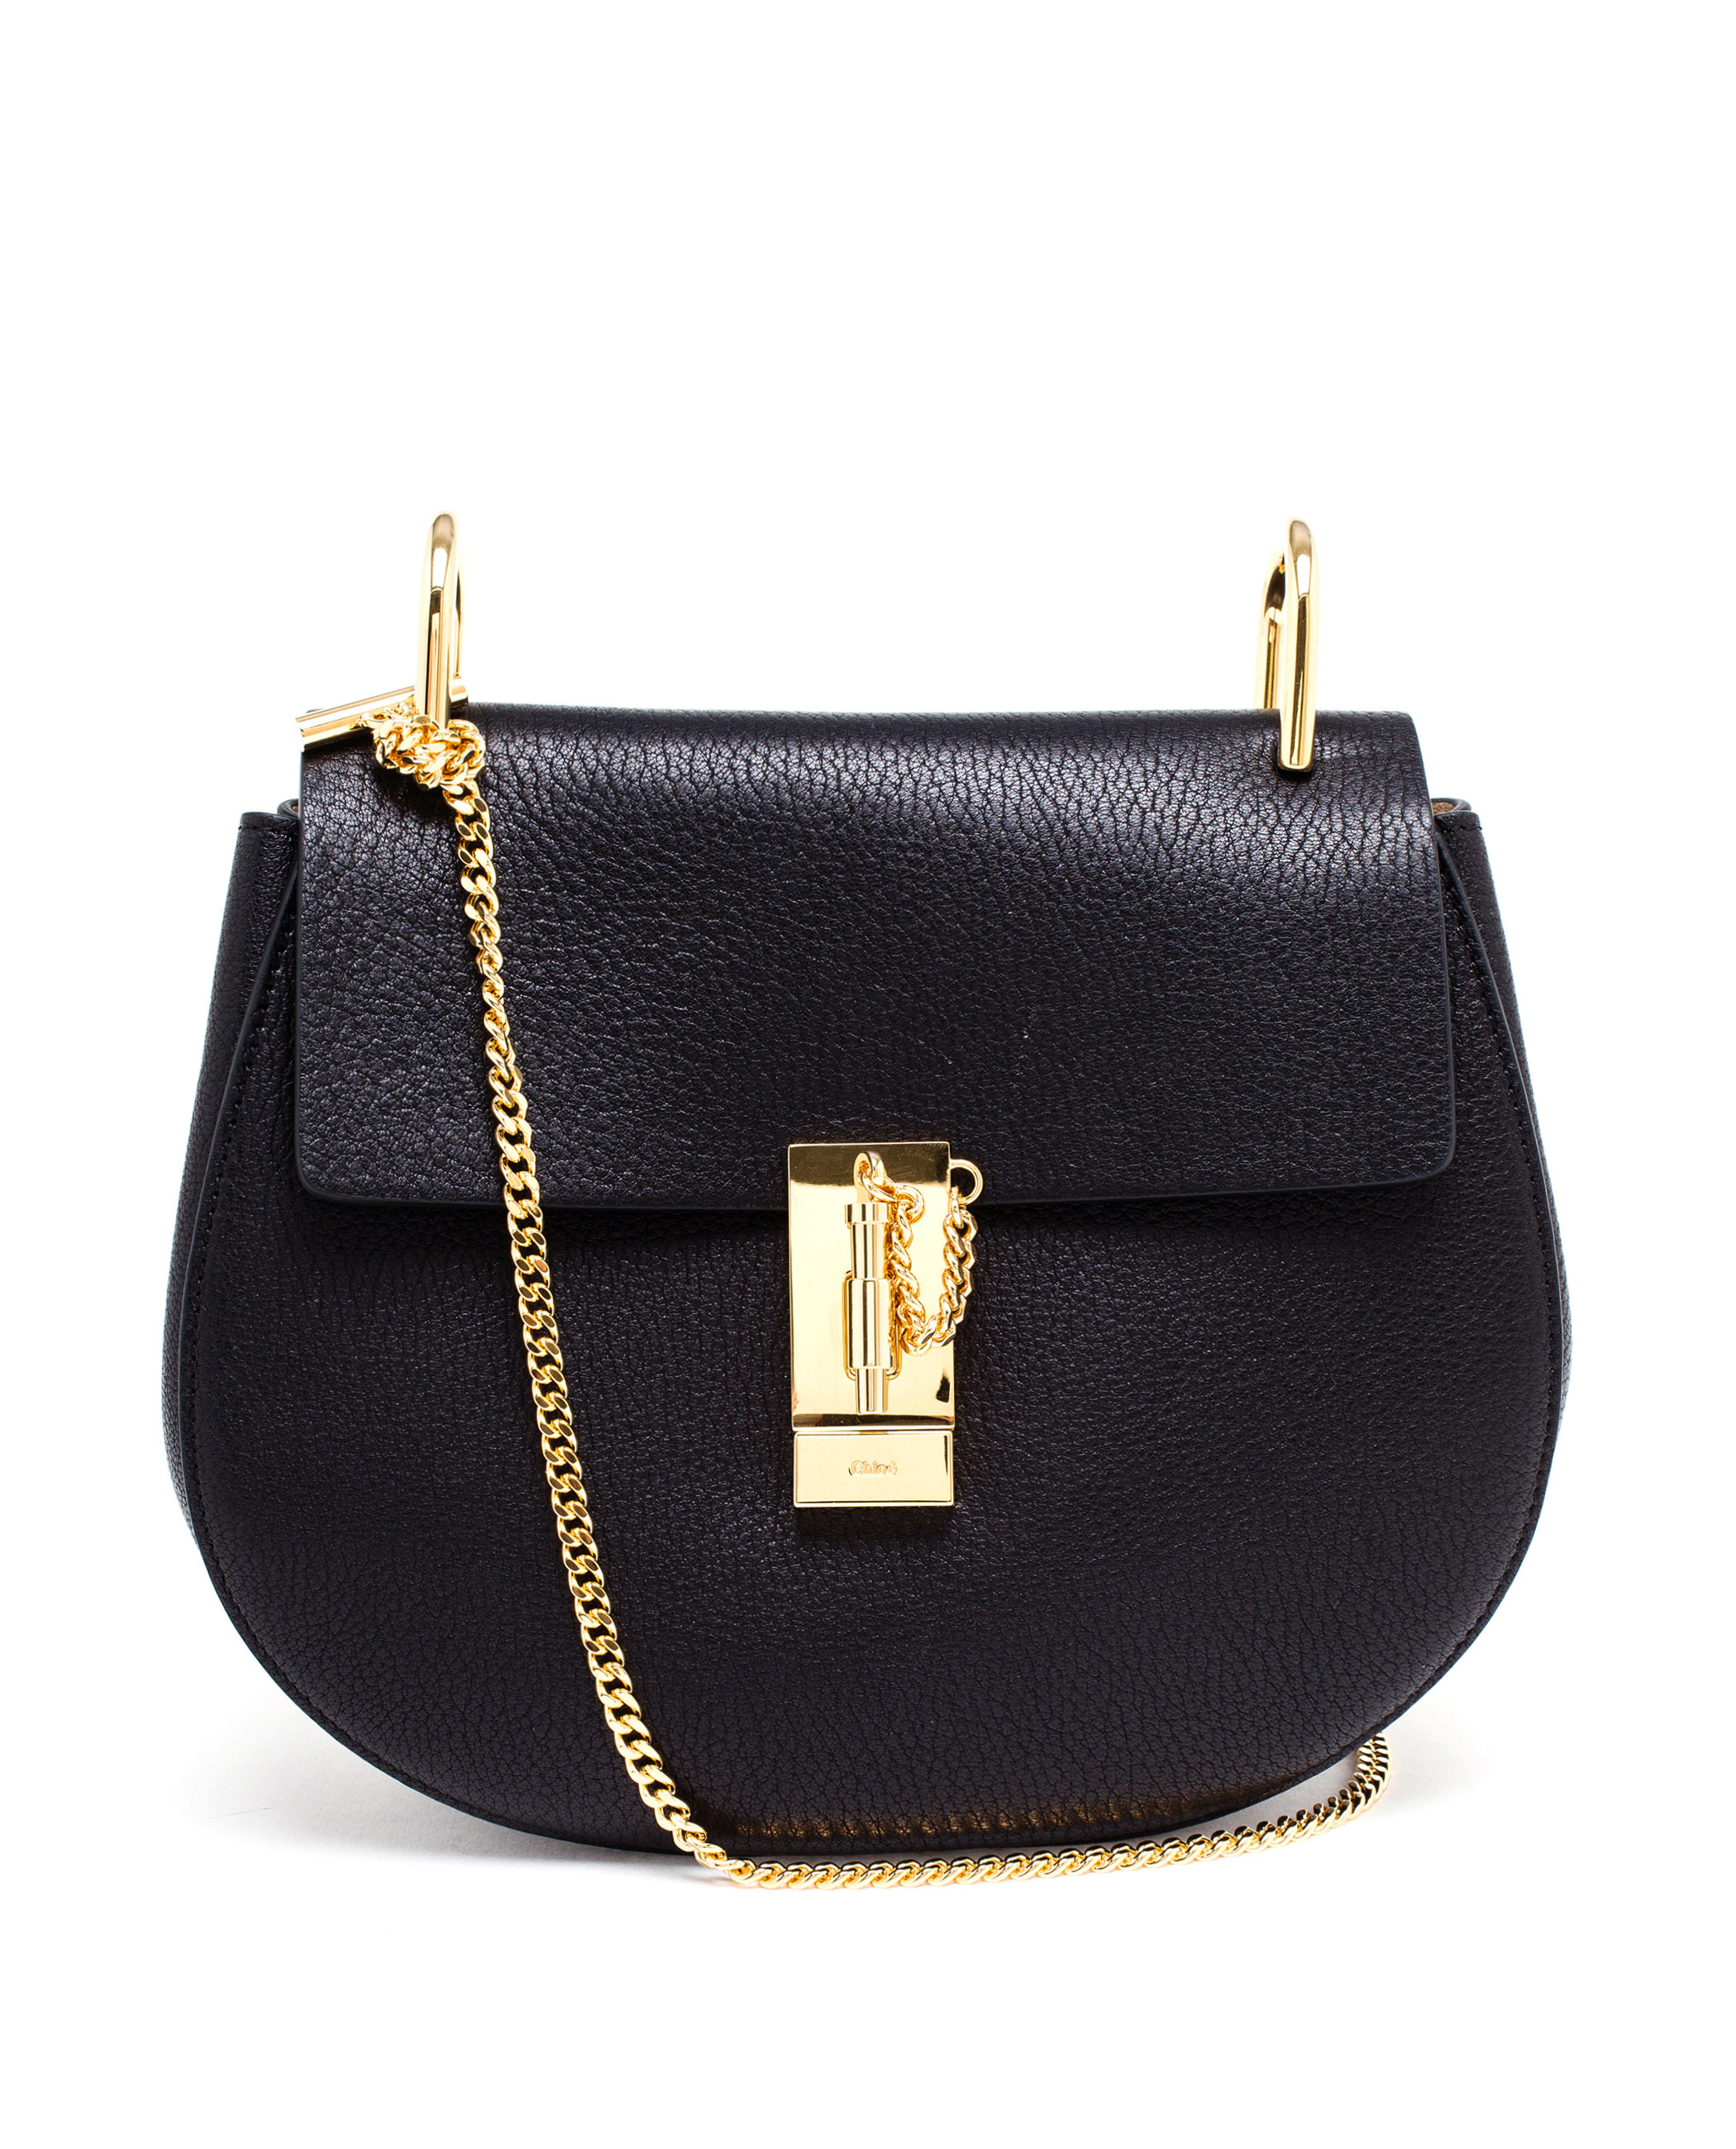 Chlo Small Grained Leather Drew Bag in Black (GREY) | Lyst  